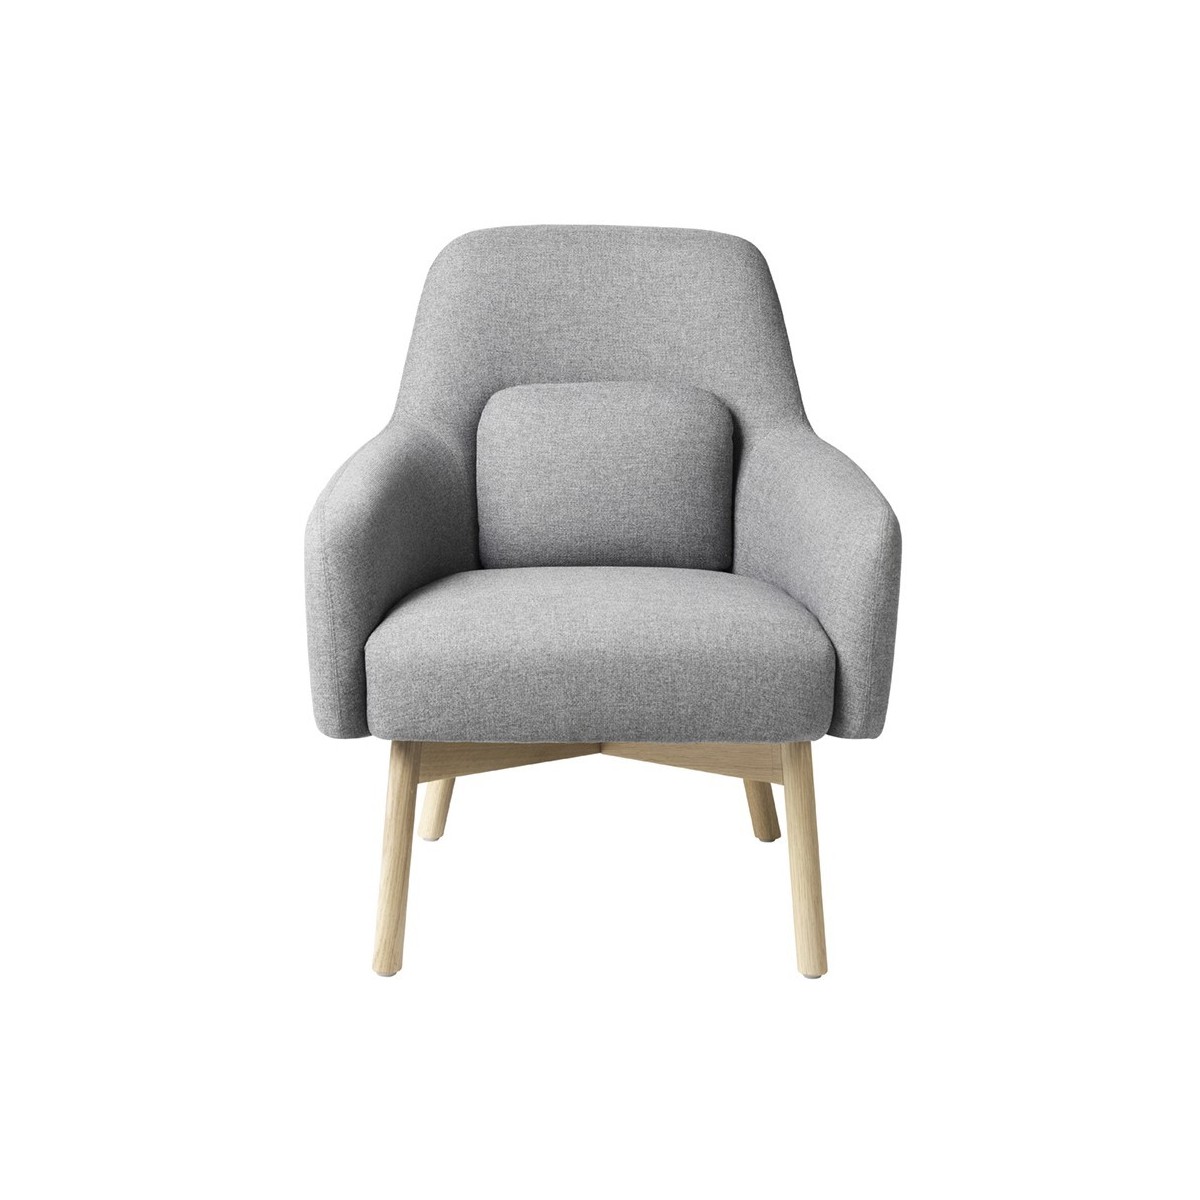 SOLD OUT light grey - armchair - Gesja